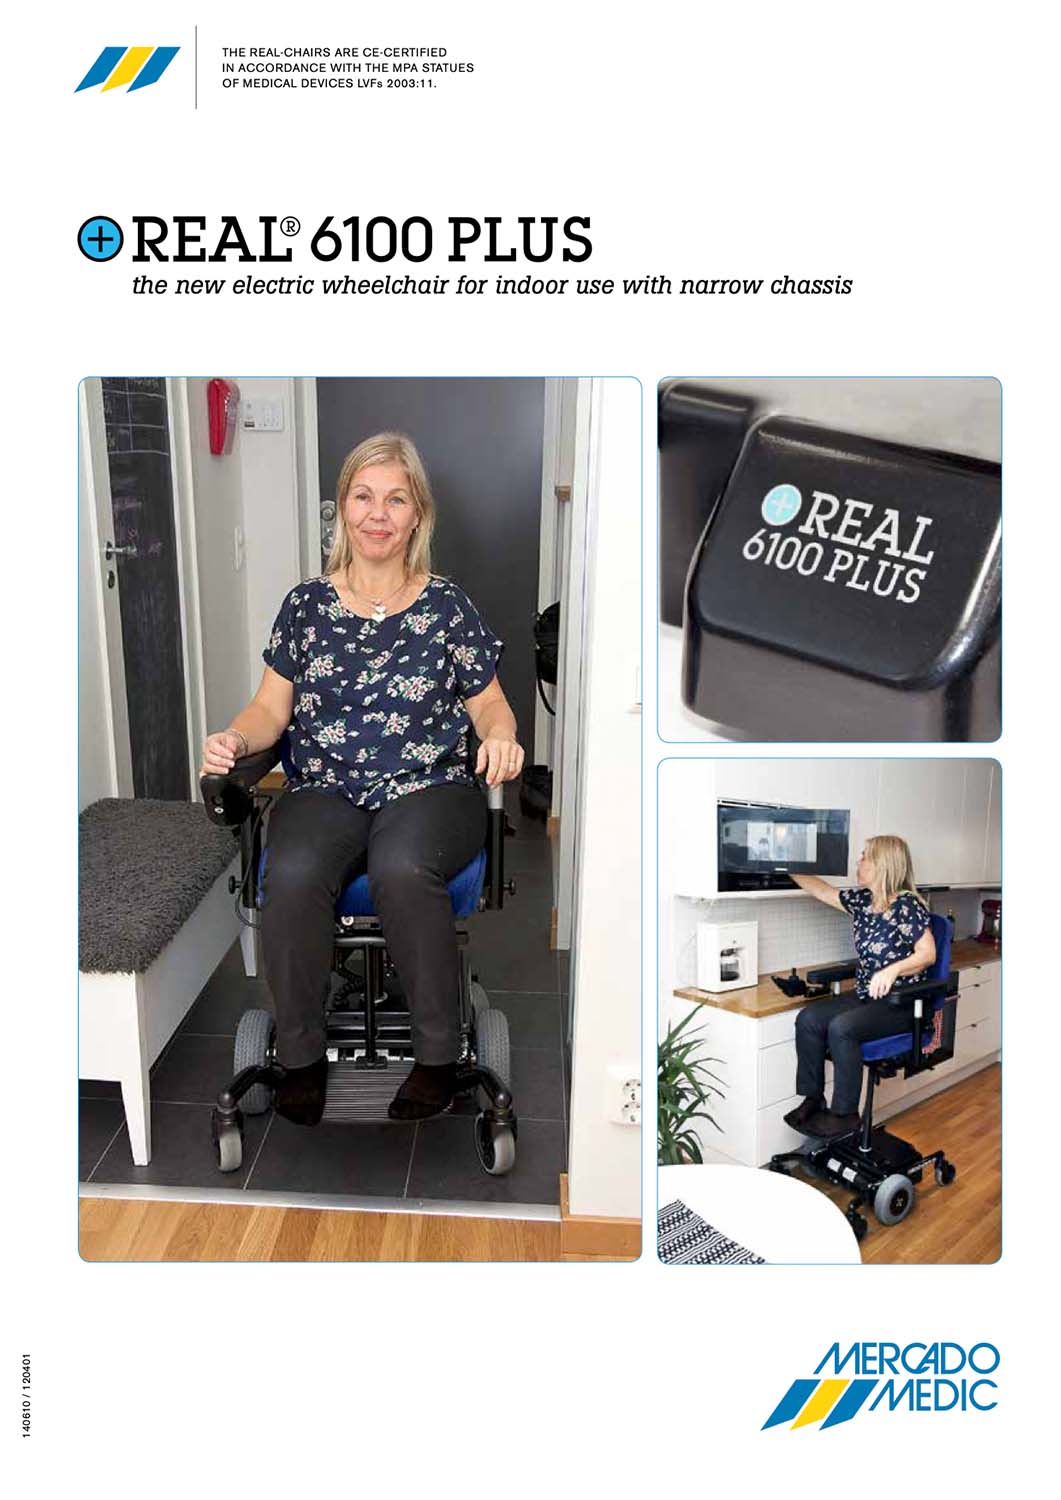 Real 6100 Plus disability electric chair